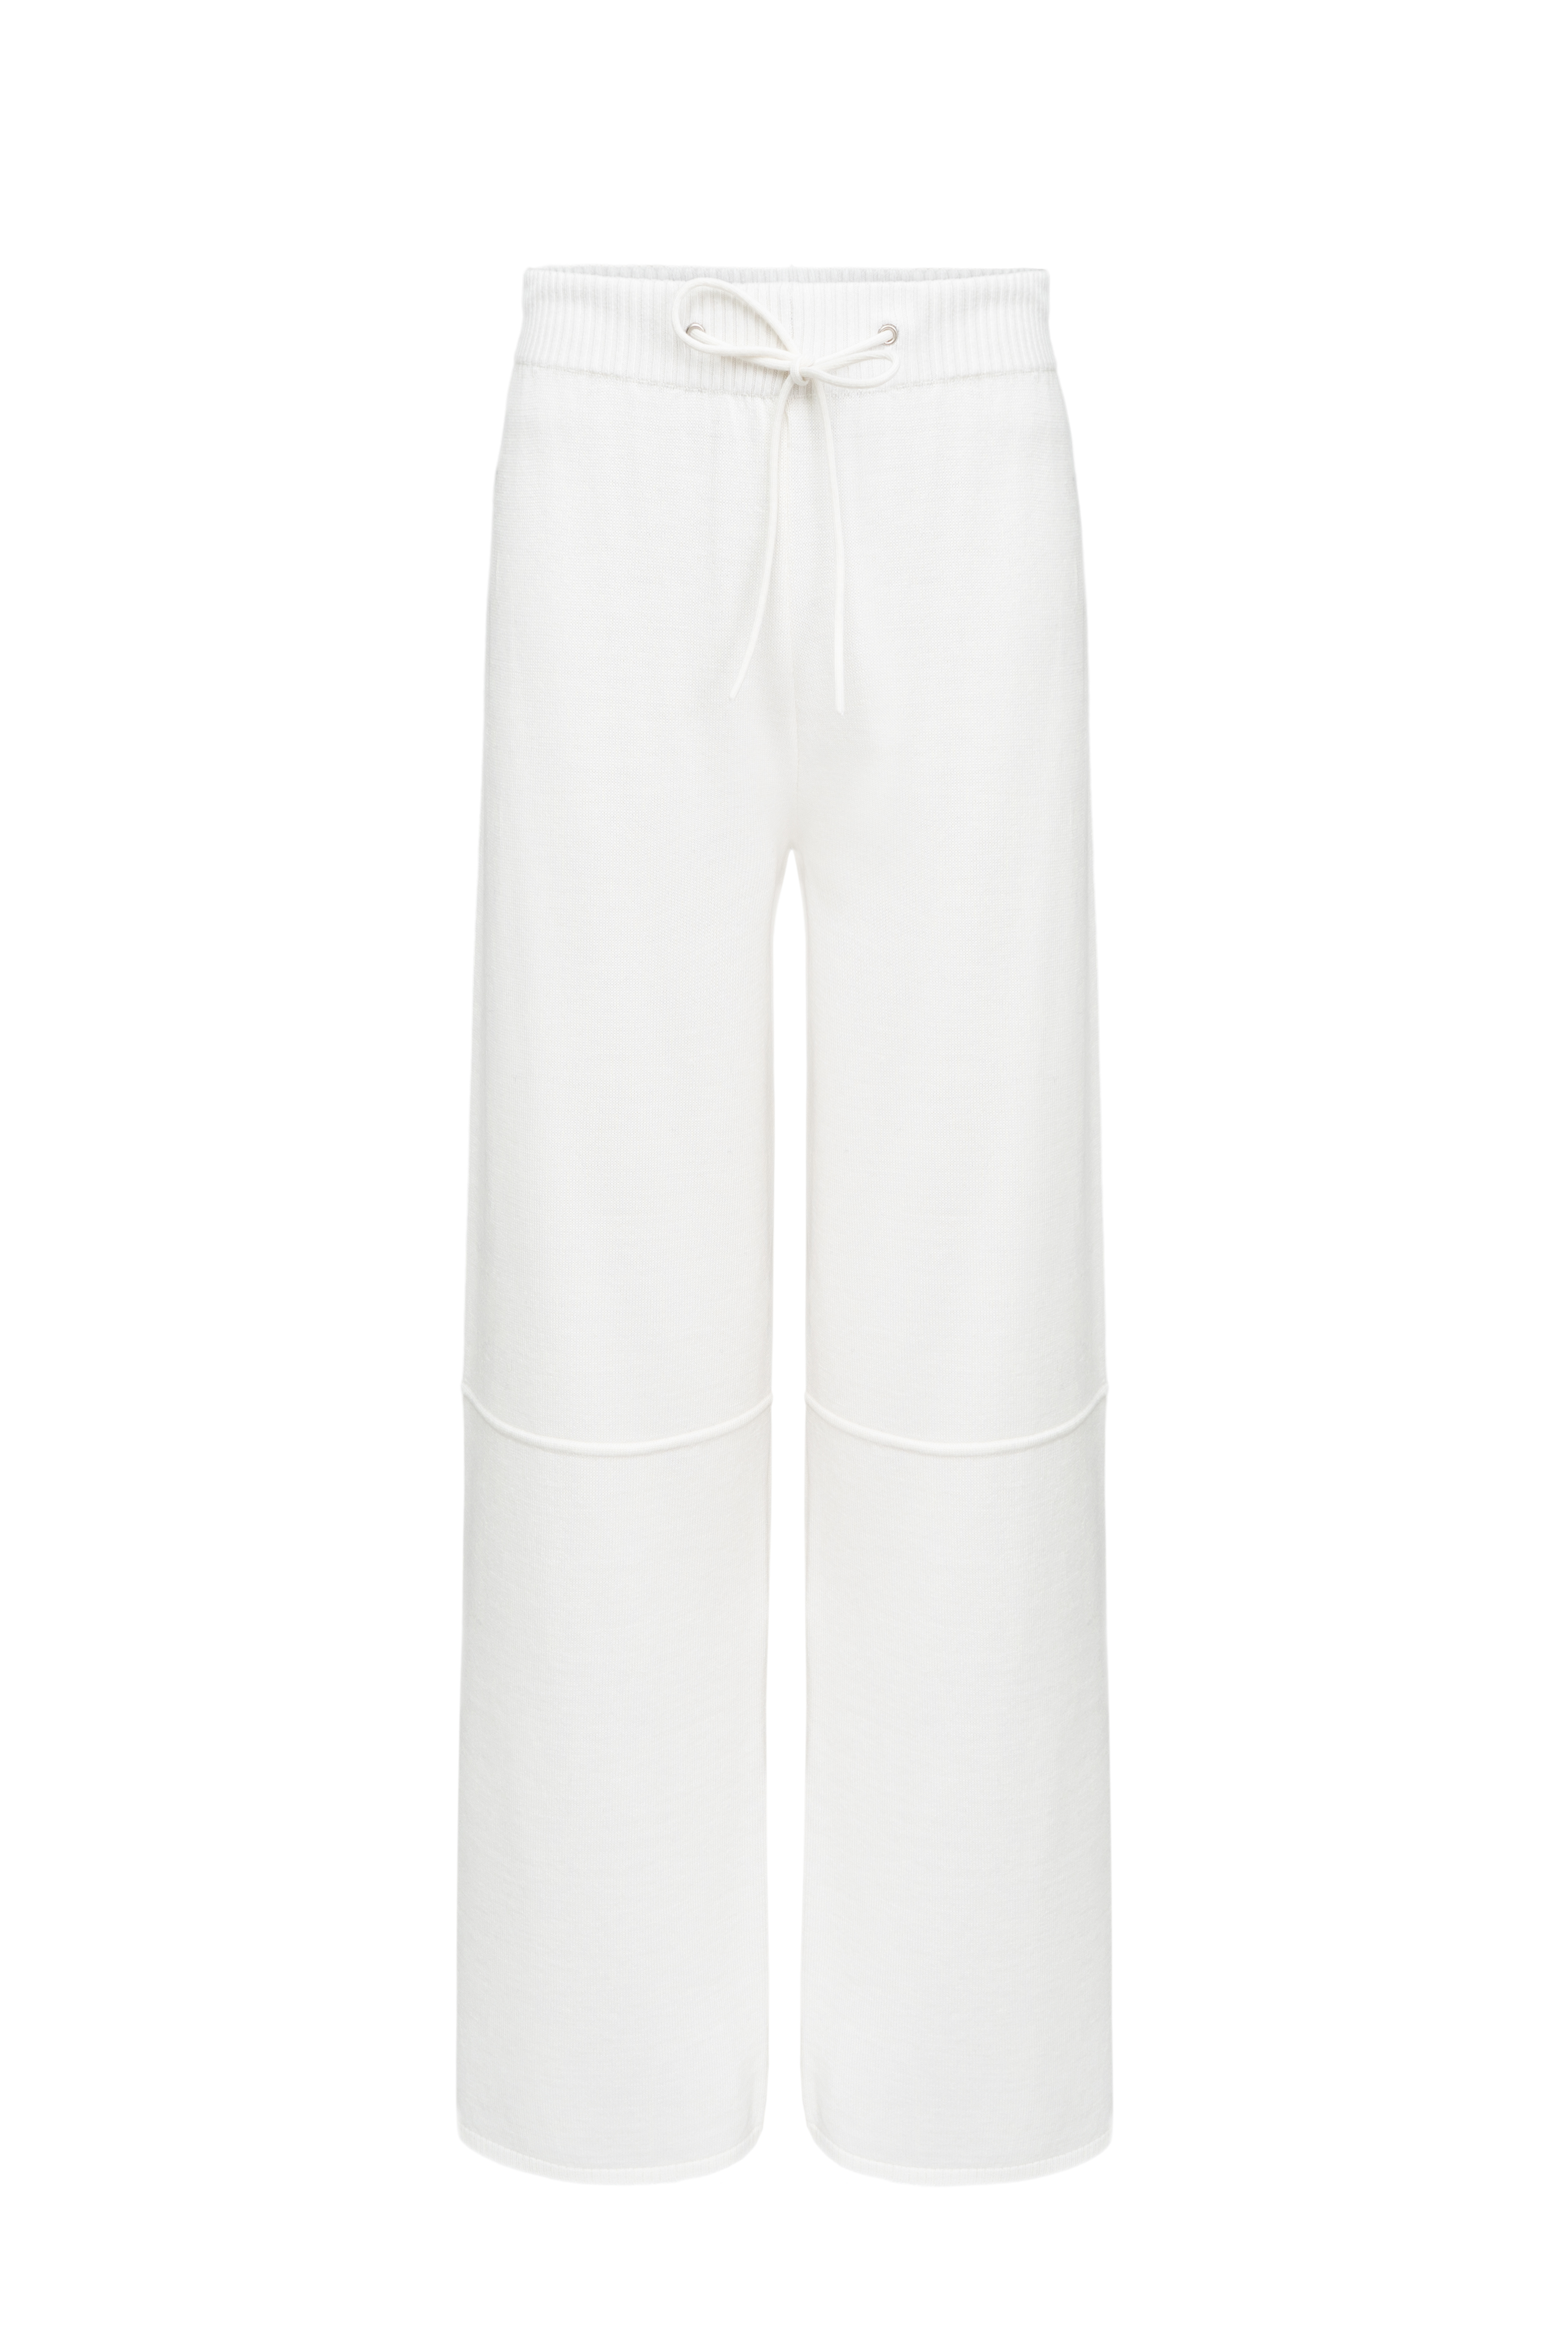 Trousers 4279-02 White from BRUSNiKA